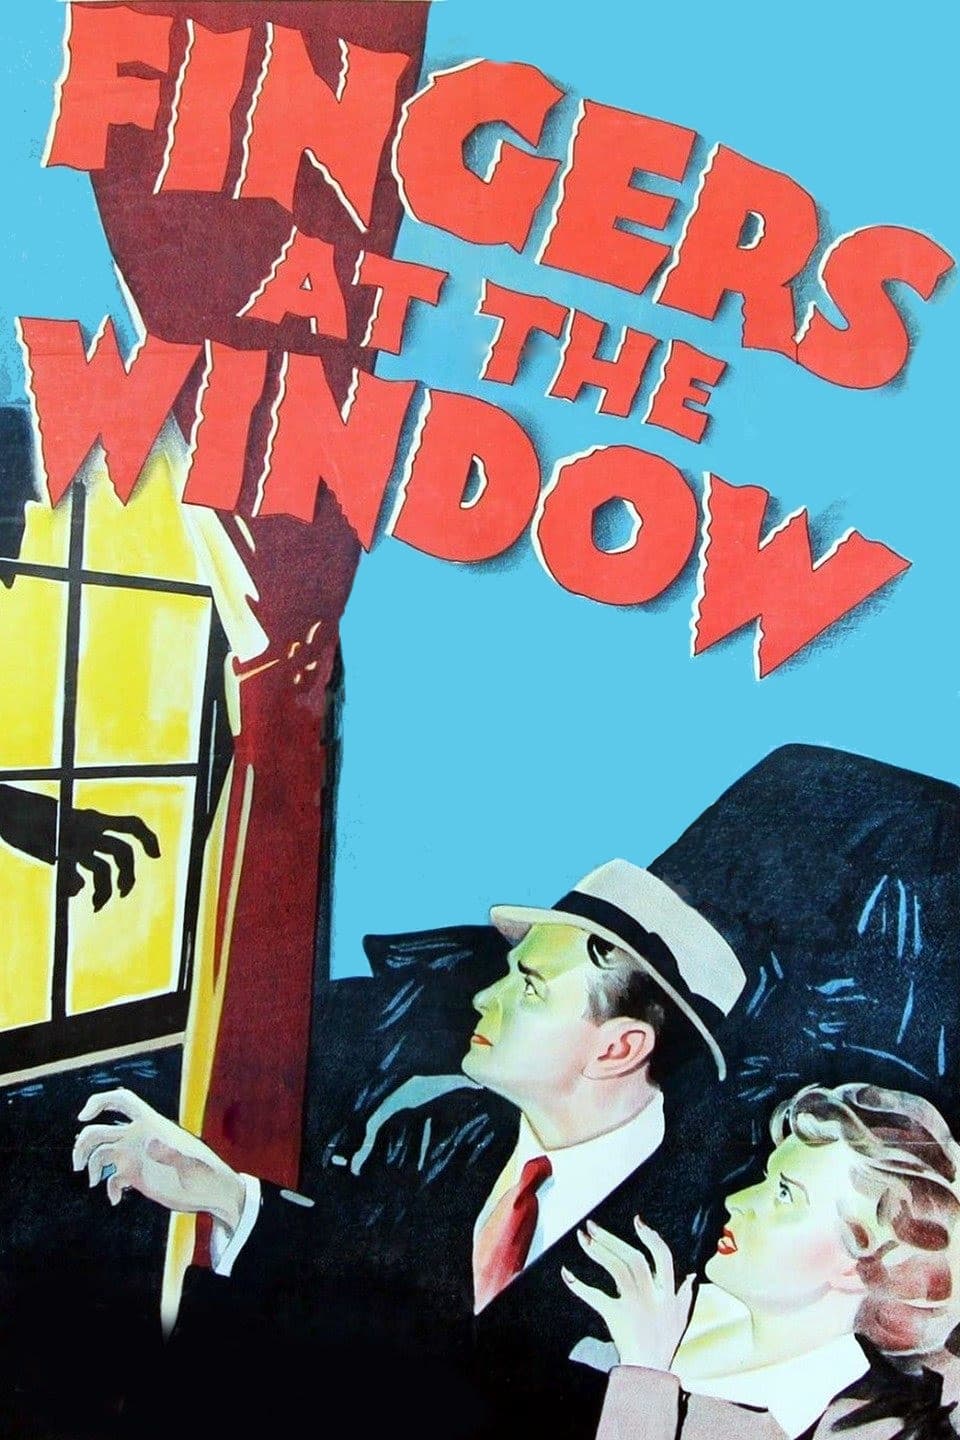 Fingers at the Window (1942)